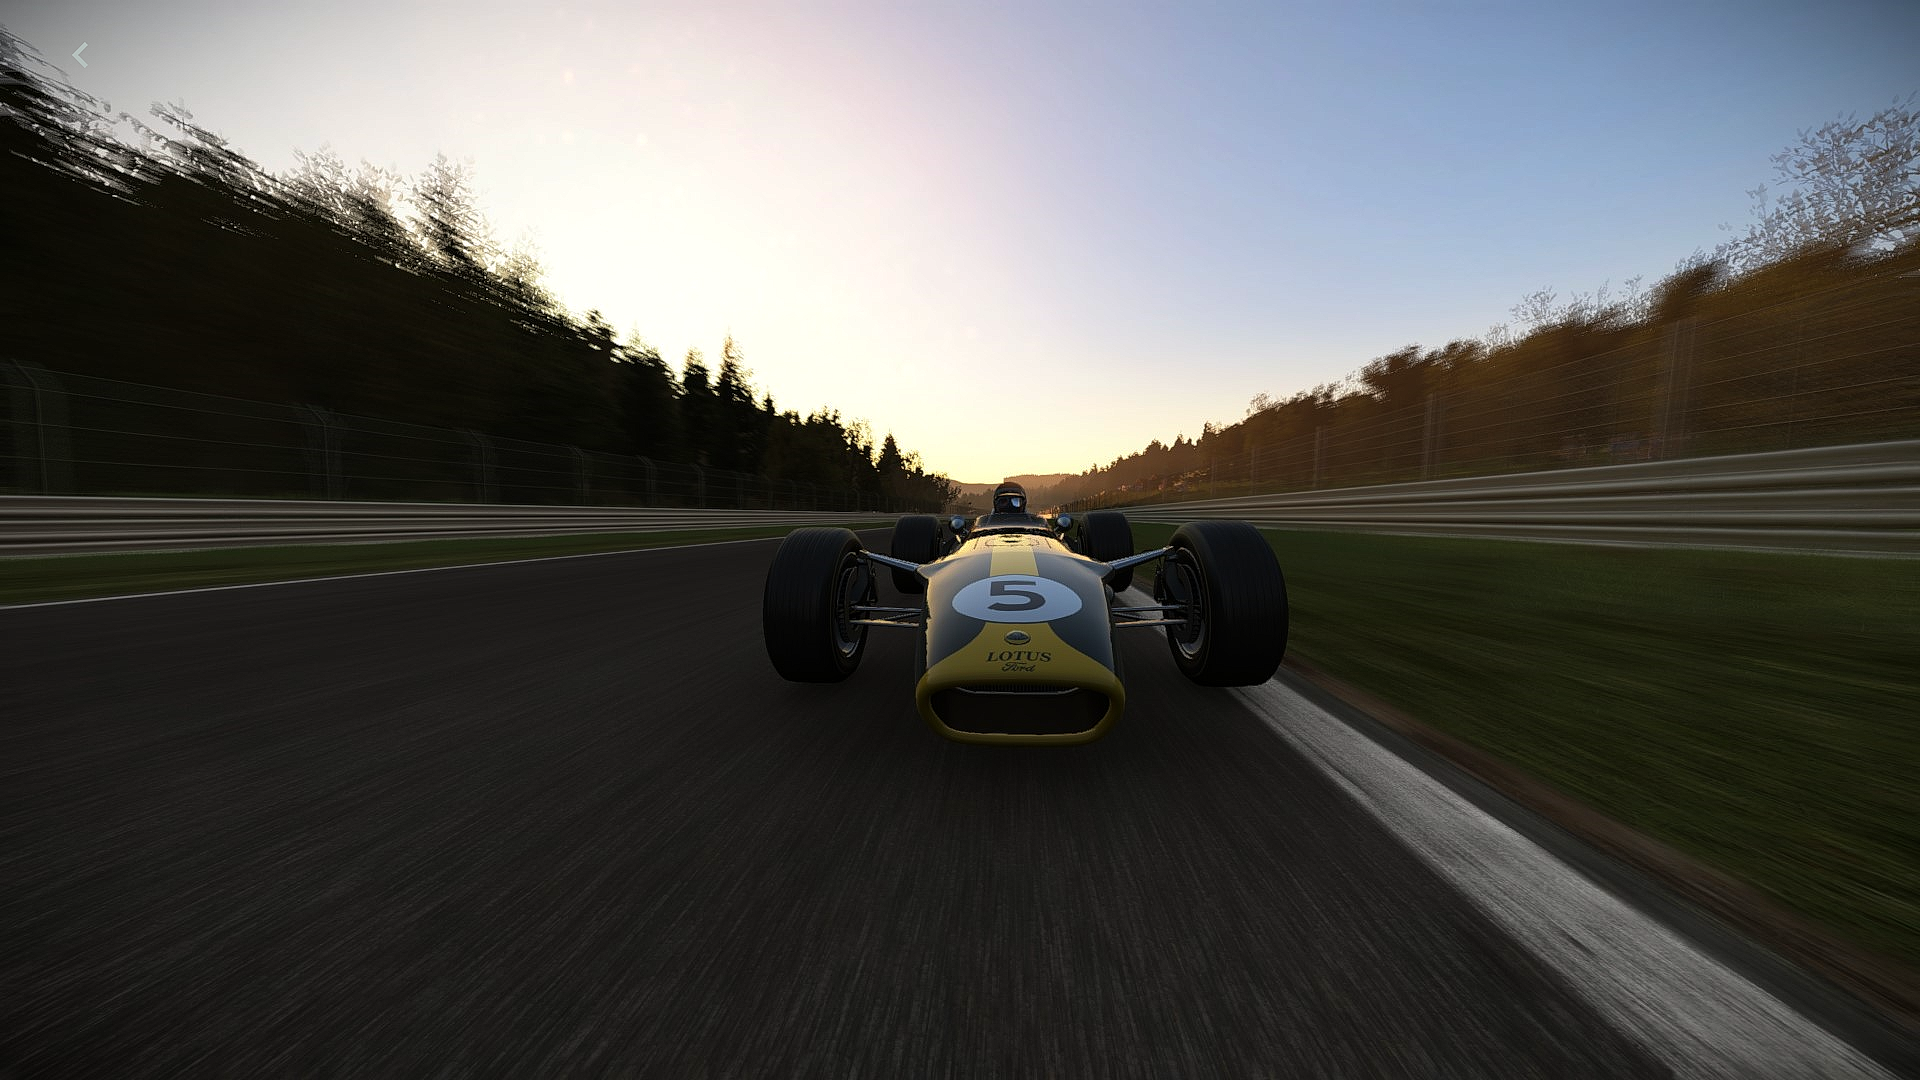 1968 Lotus 49 Spa Francorchamps Project Cars 1920x1080